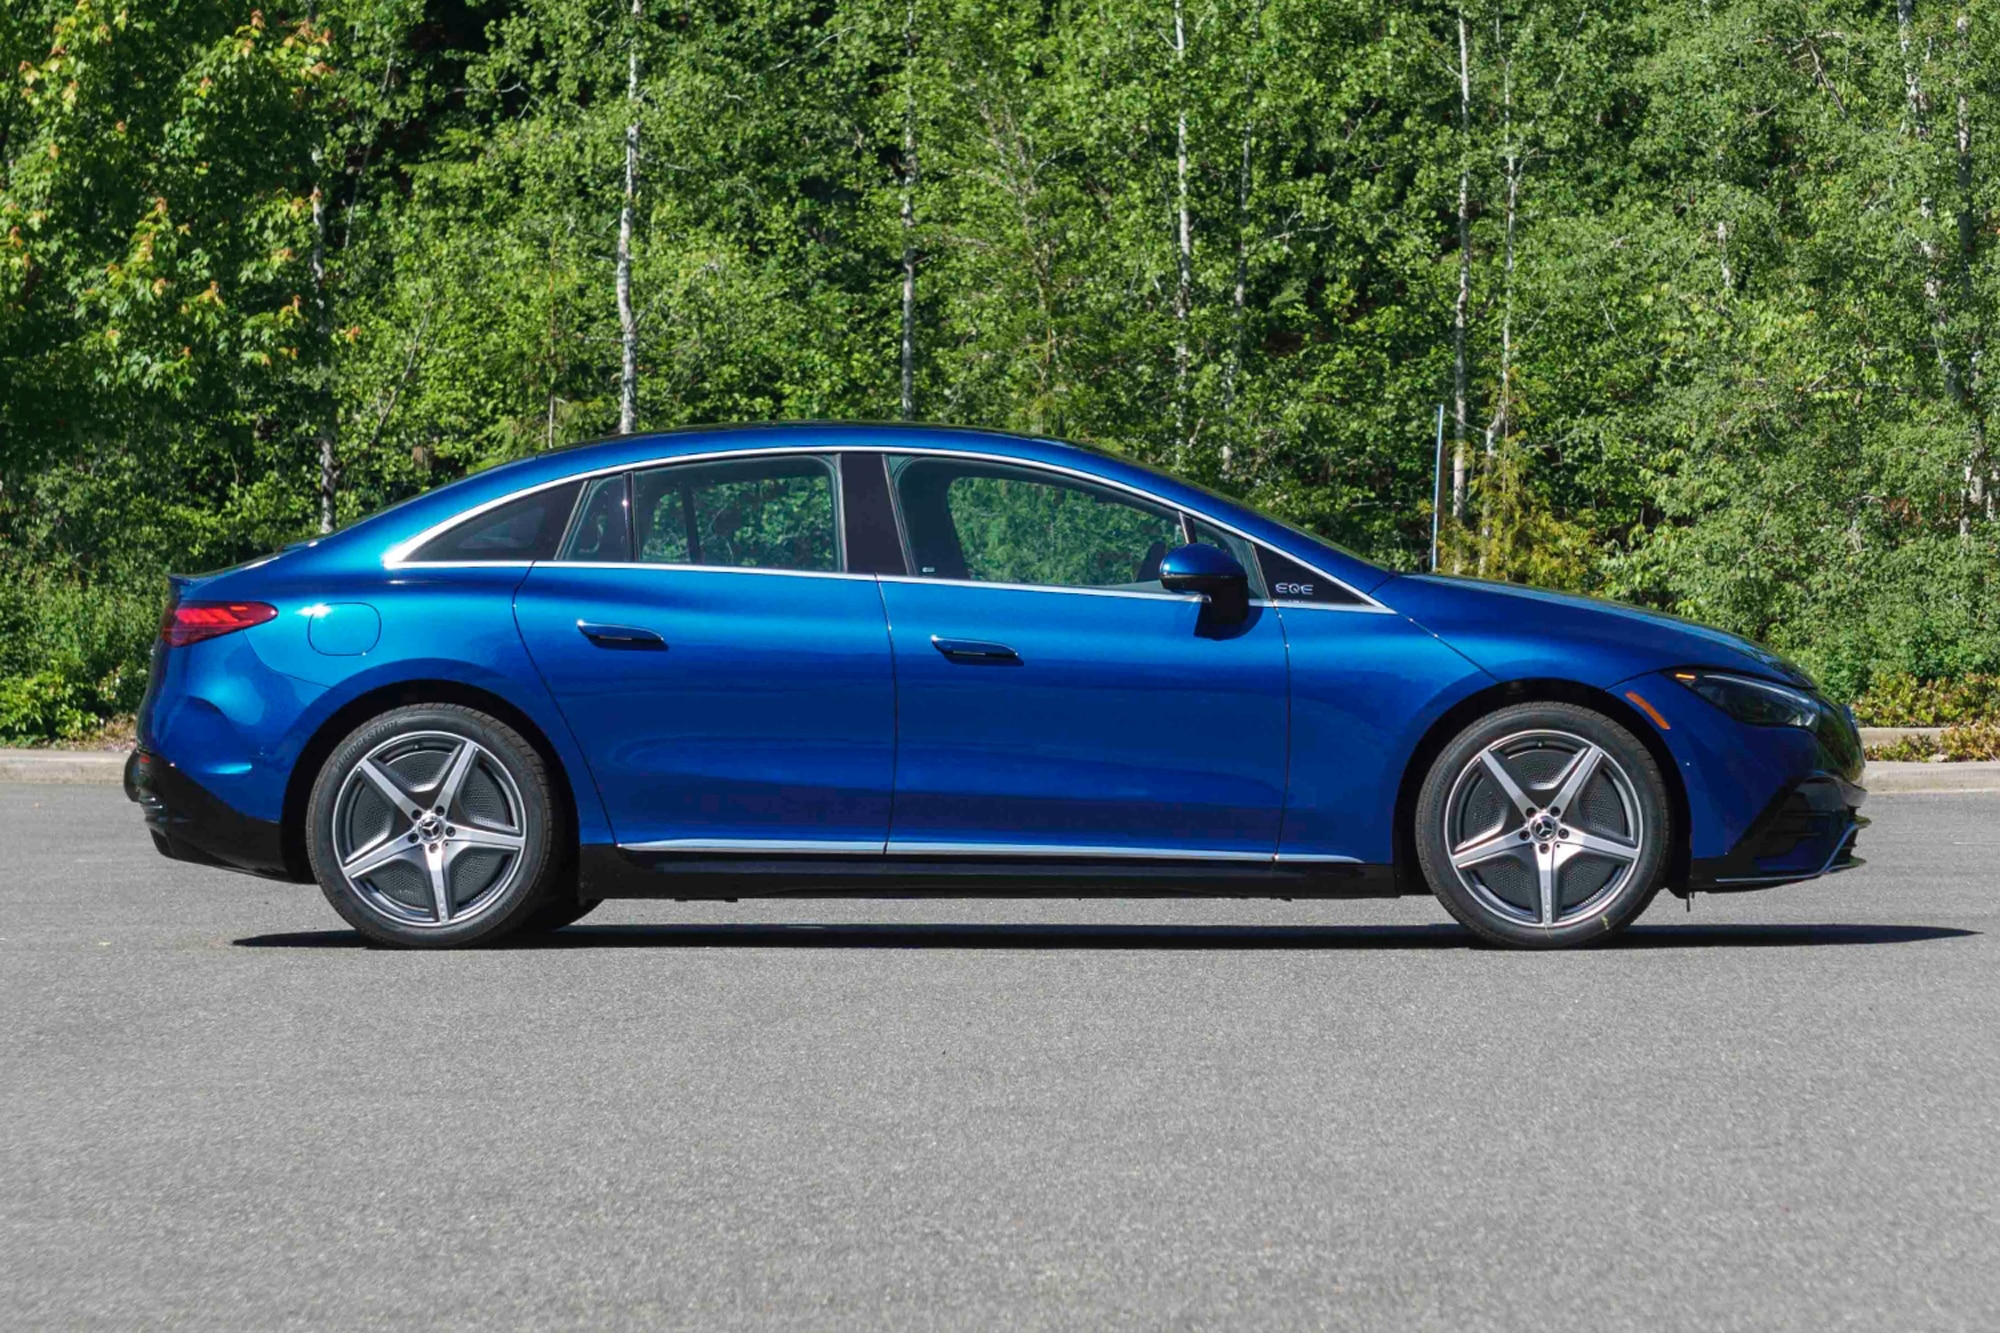 2023 Mercedes-Benz EQE Sedan in Starling Blue side view parked next to the woods